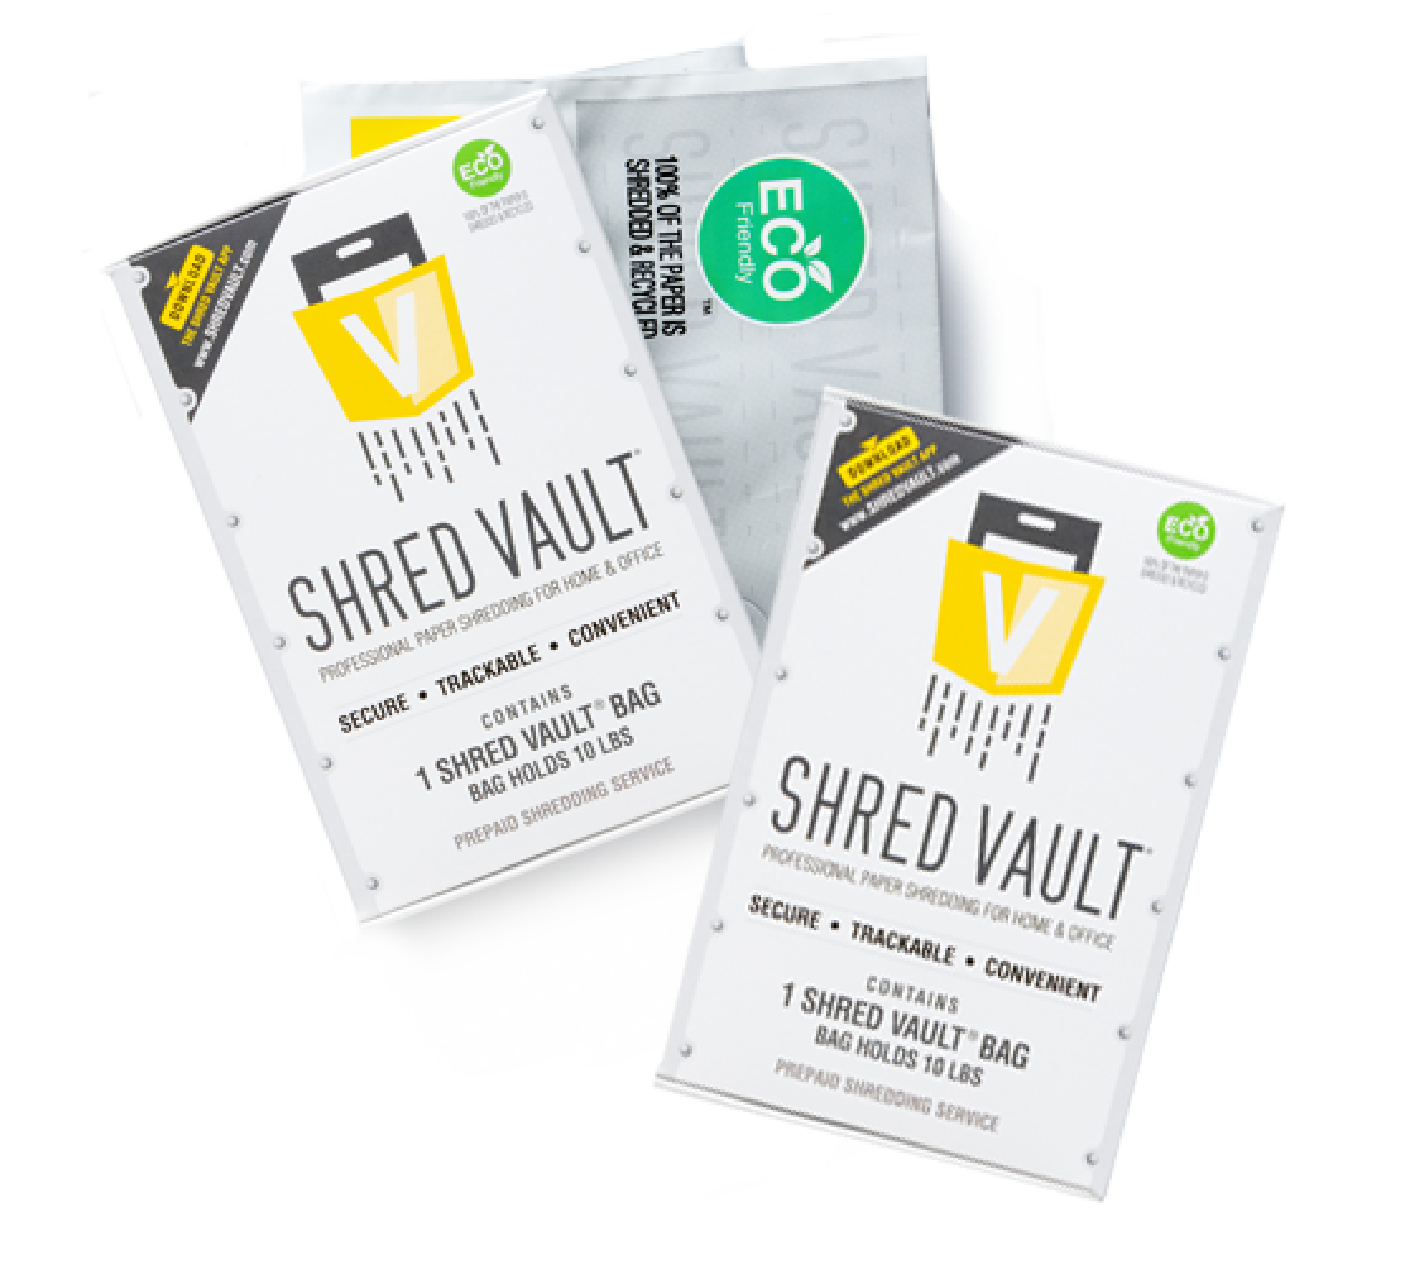 shred-vault-bags-promotion